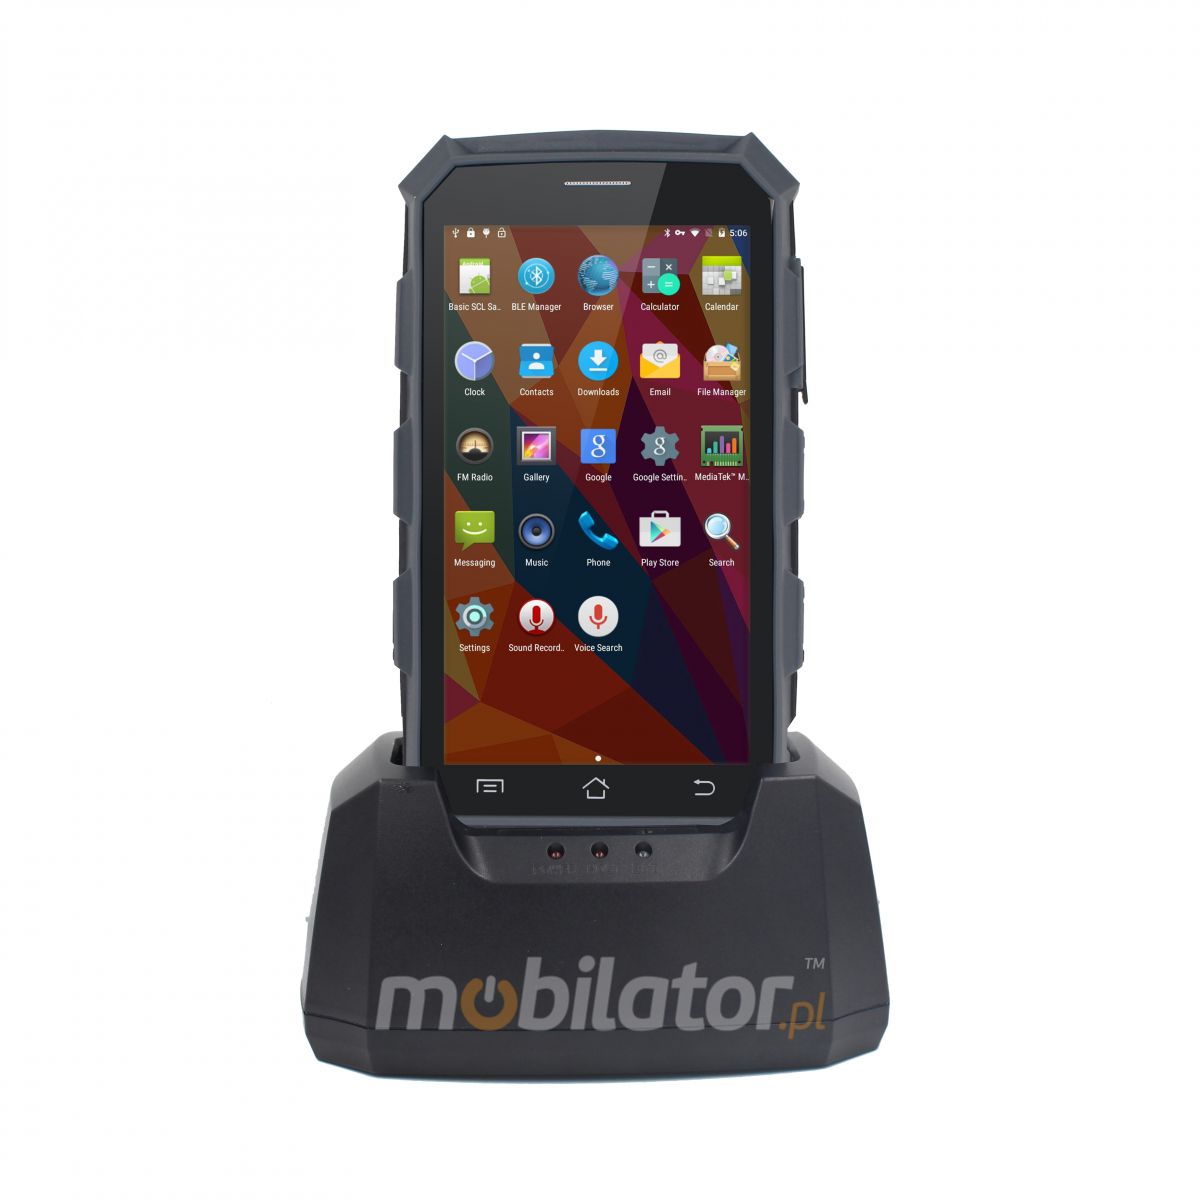 MobiPad C50 v.13.1 - waterproof data collector-inventory for wholesalers - with Honeywell N6603 2D code scanner and HF RFID